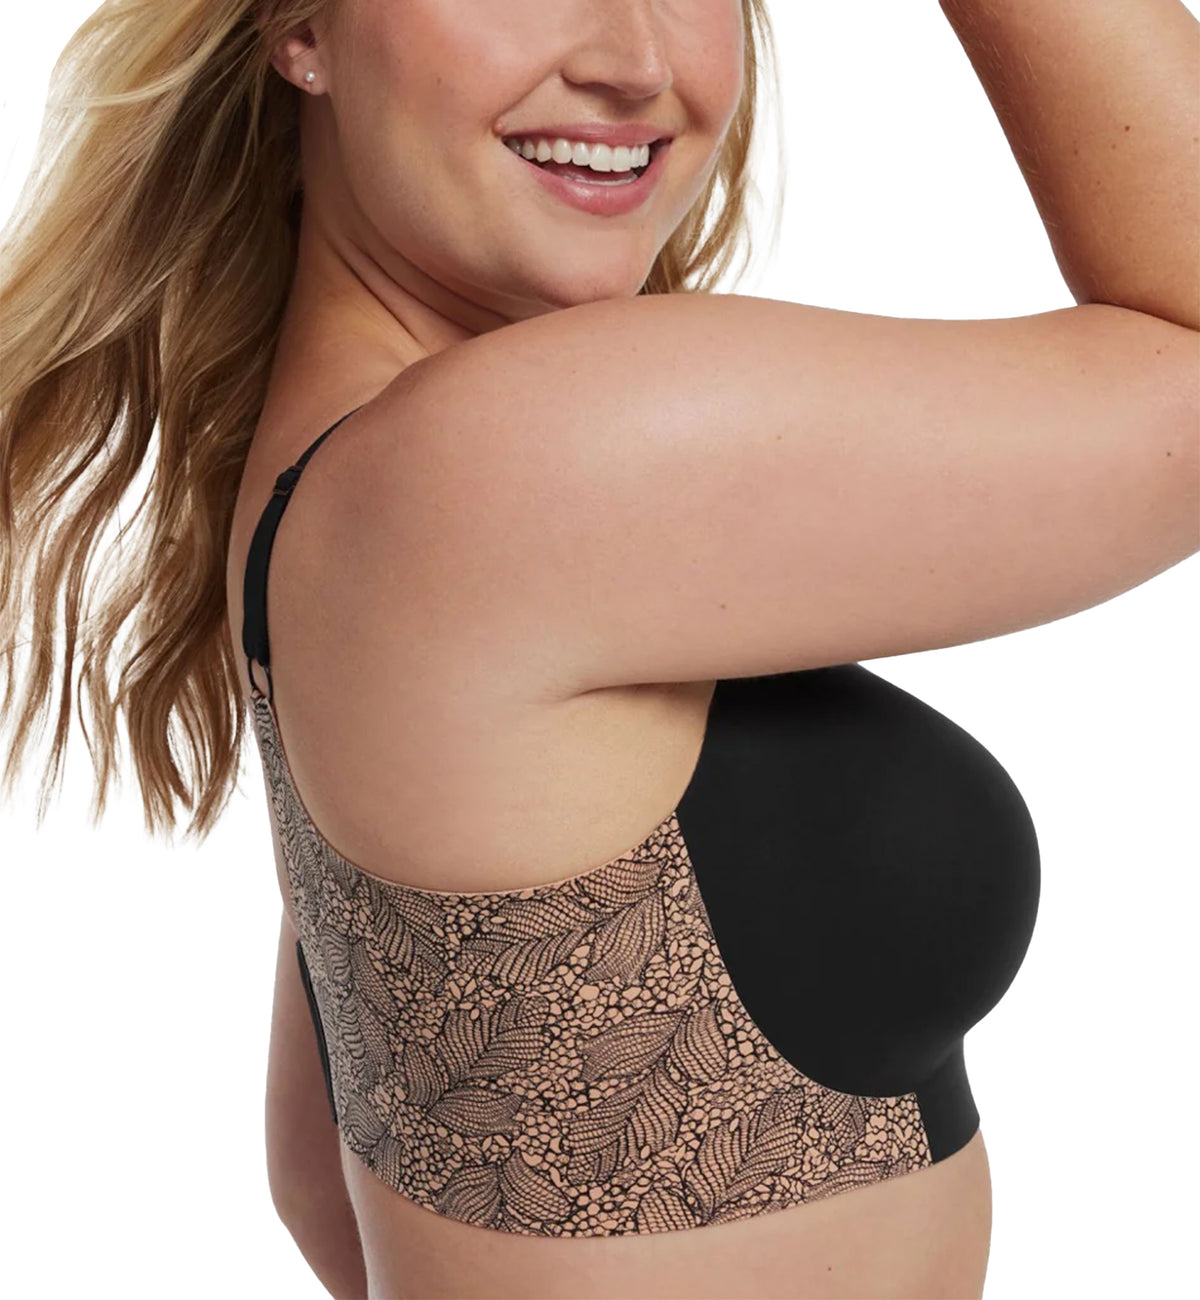 Evelyn &amp; Bobbie BEYOND Adjustable Bra (1732),Small,Black Lace - Black Lace,Small